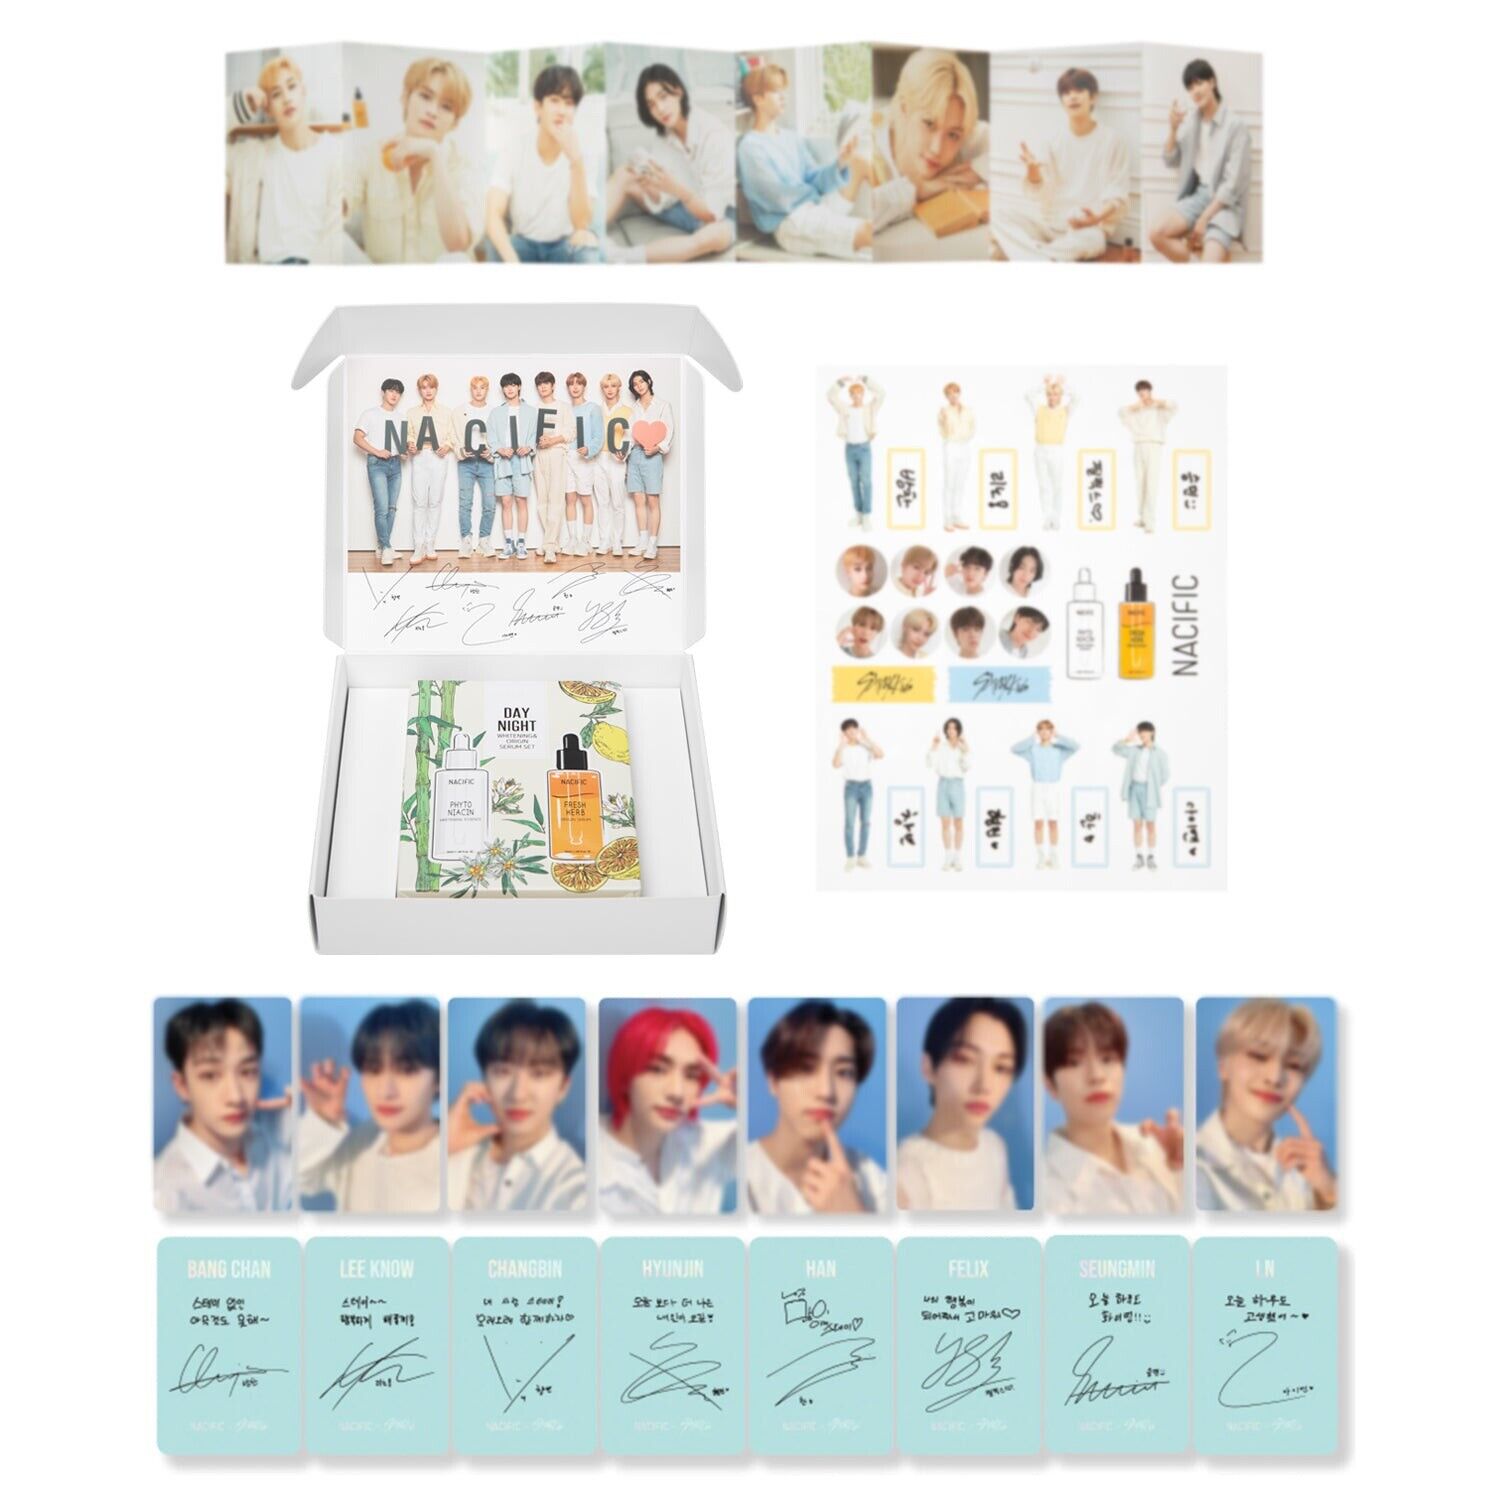 NACIFIC X STRAY KIDS Collaboration Box (Limited Edition) stray kids merch photocards